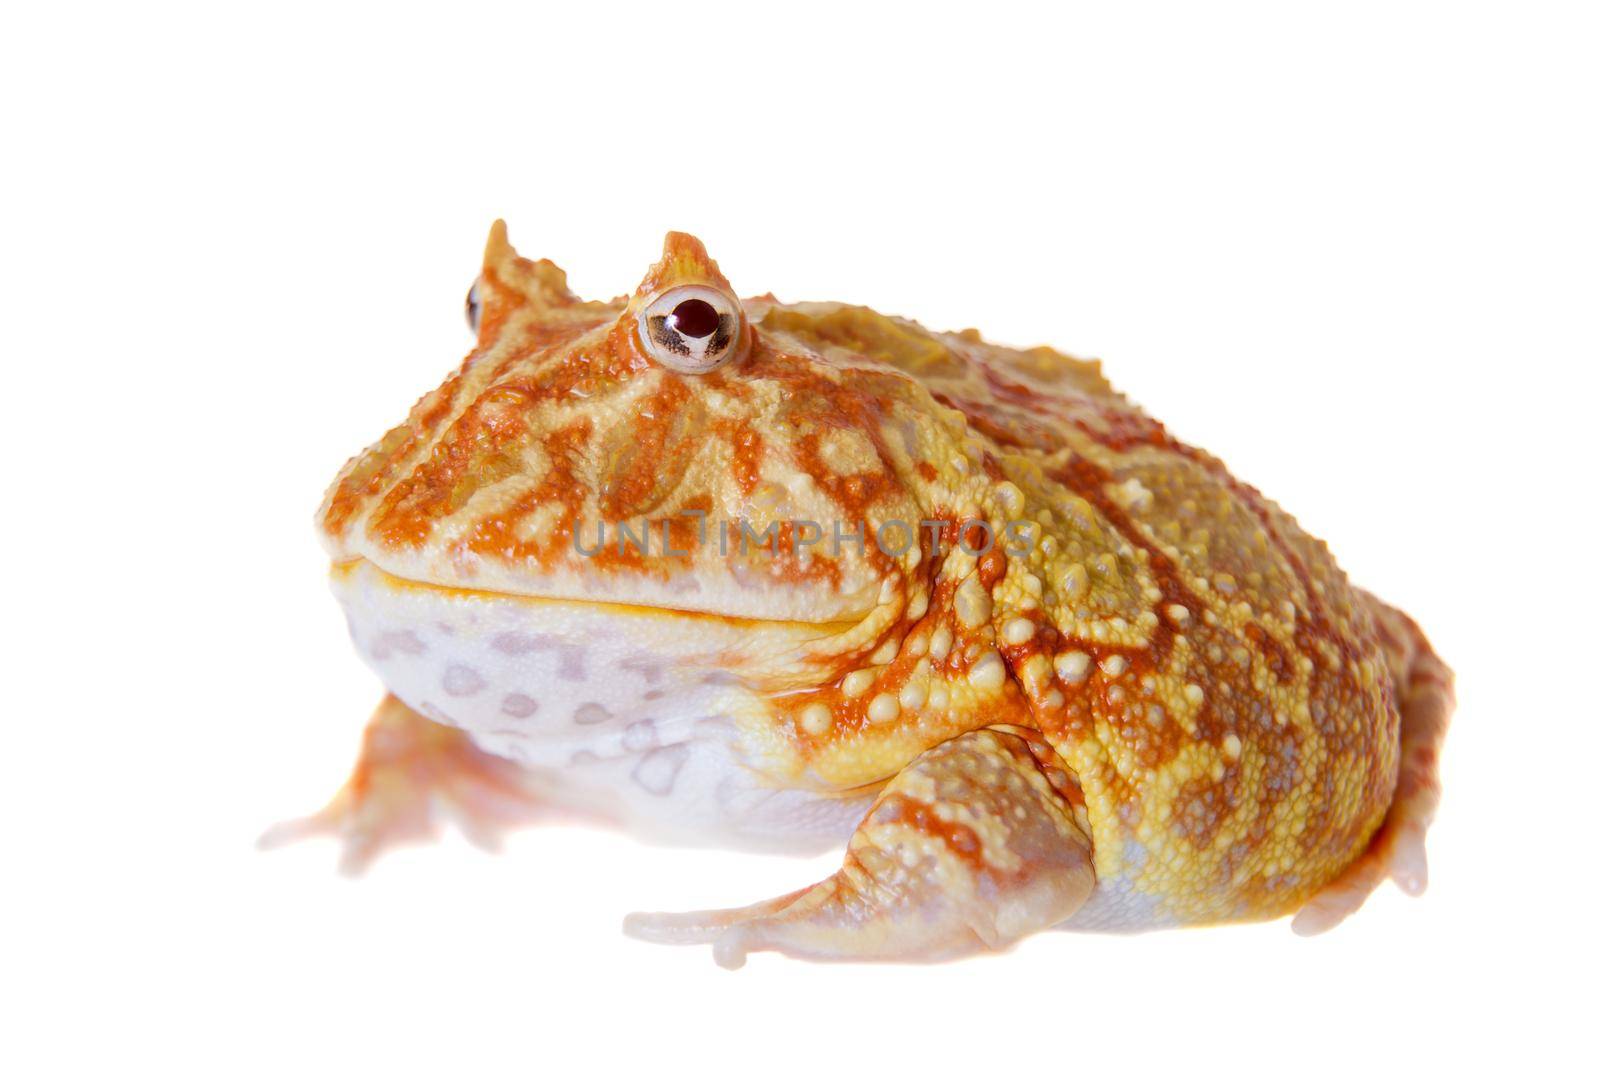 The chachoan horned frog, Ceratophrys cranwelli, isolated on white background